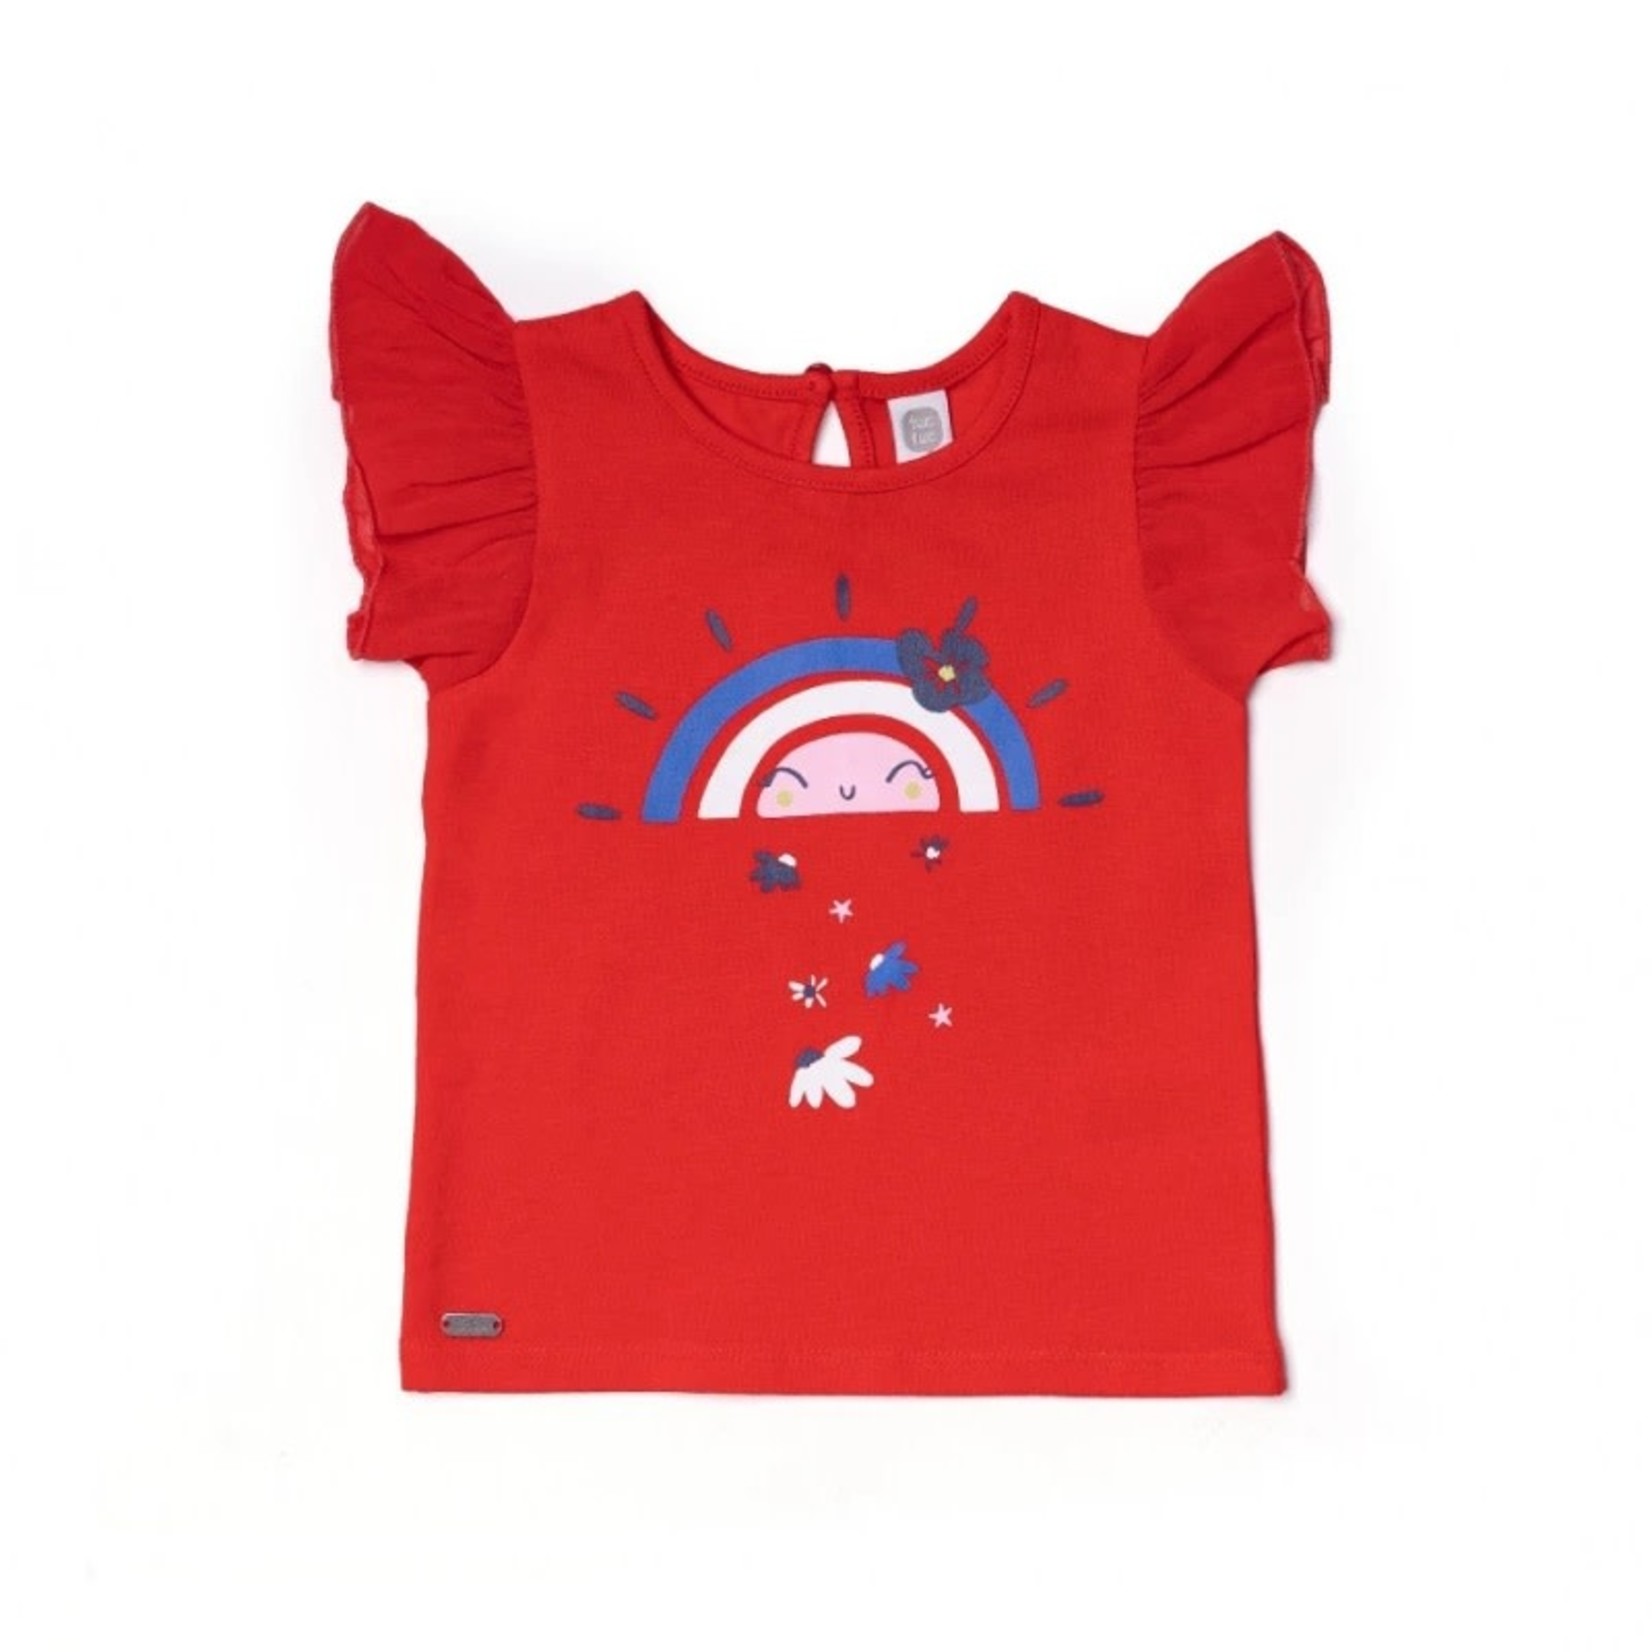 TucTuc TUC TUC - Red T-Shirt with Ruffled Sleeves and Sunset Print 'Beach Day'